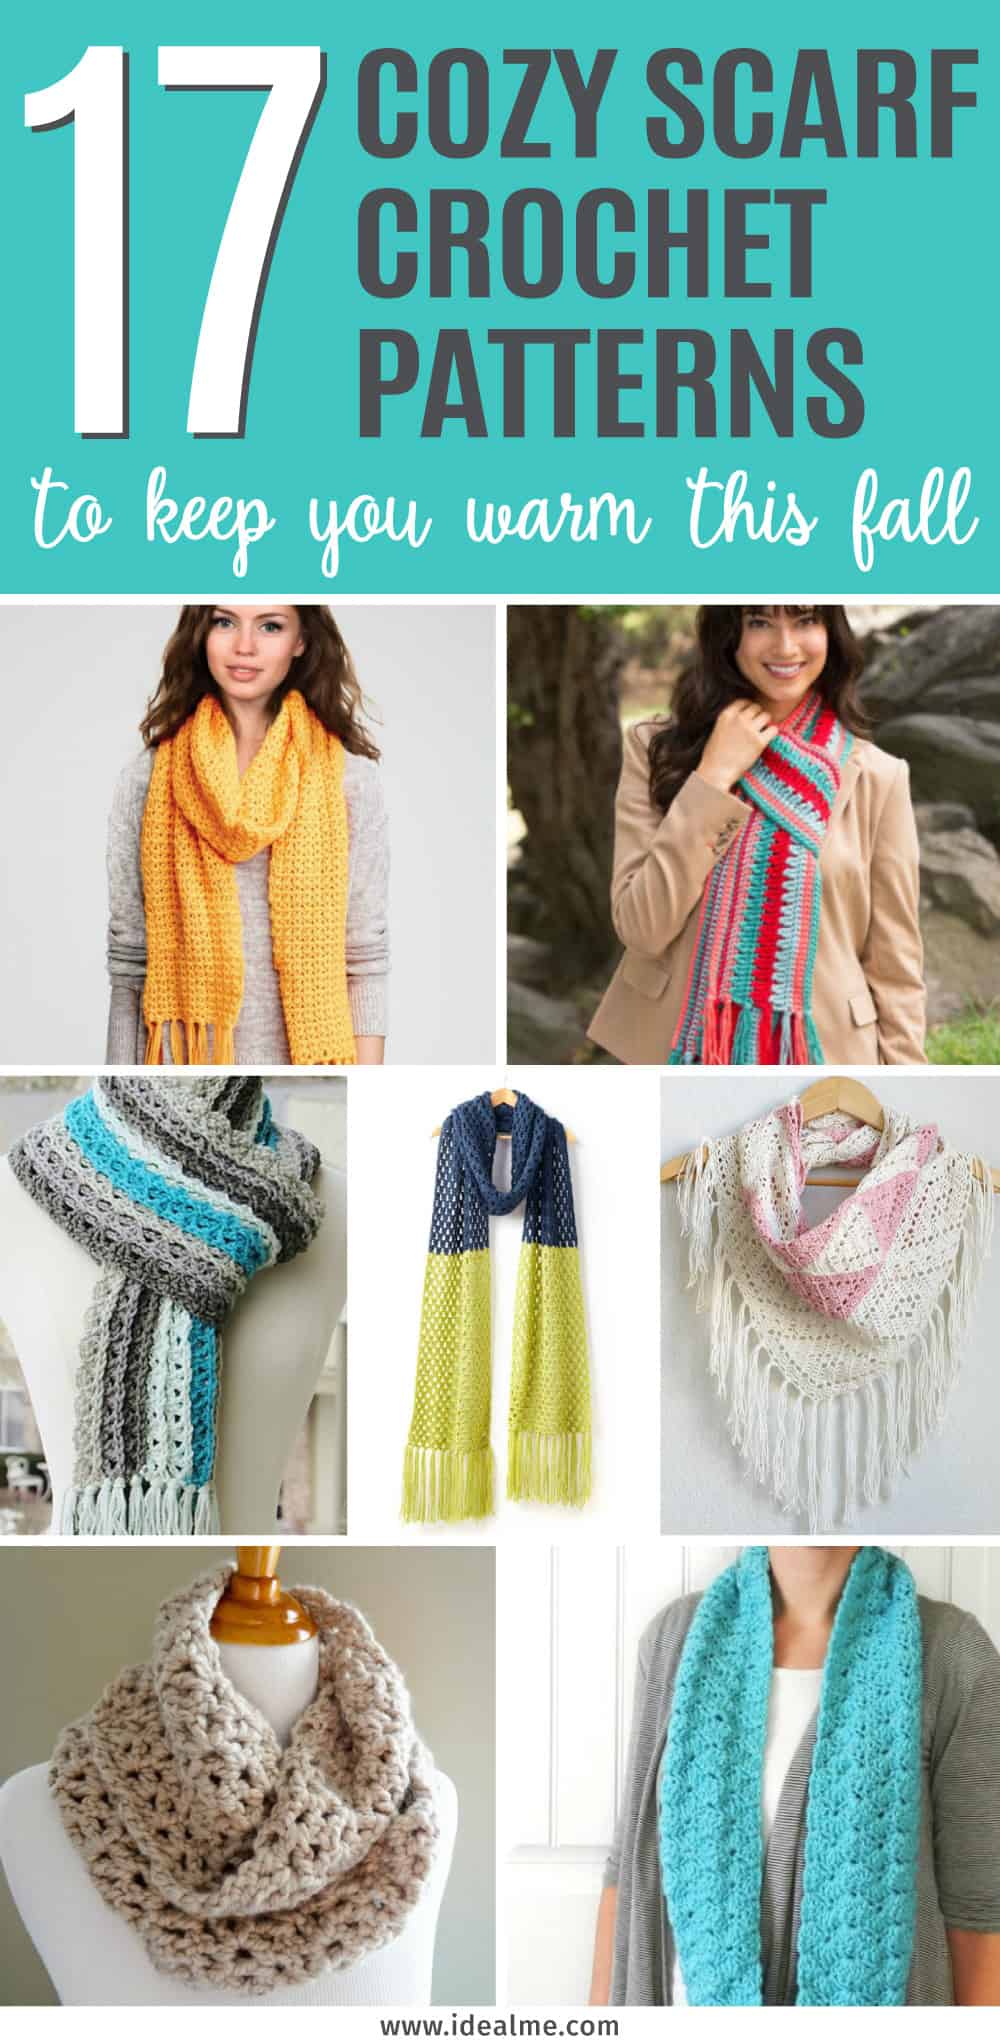 Grab some soft and cozy yarn. There's something for everyone with these 17 cozy scarf crochet patterns to keep you warm this fall.